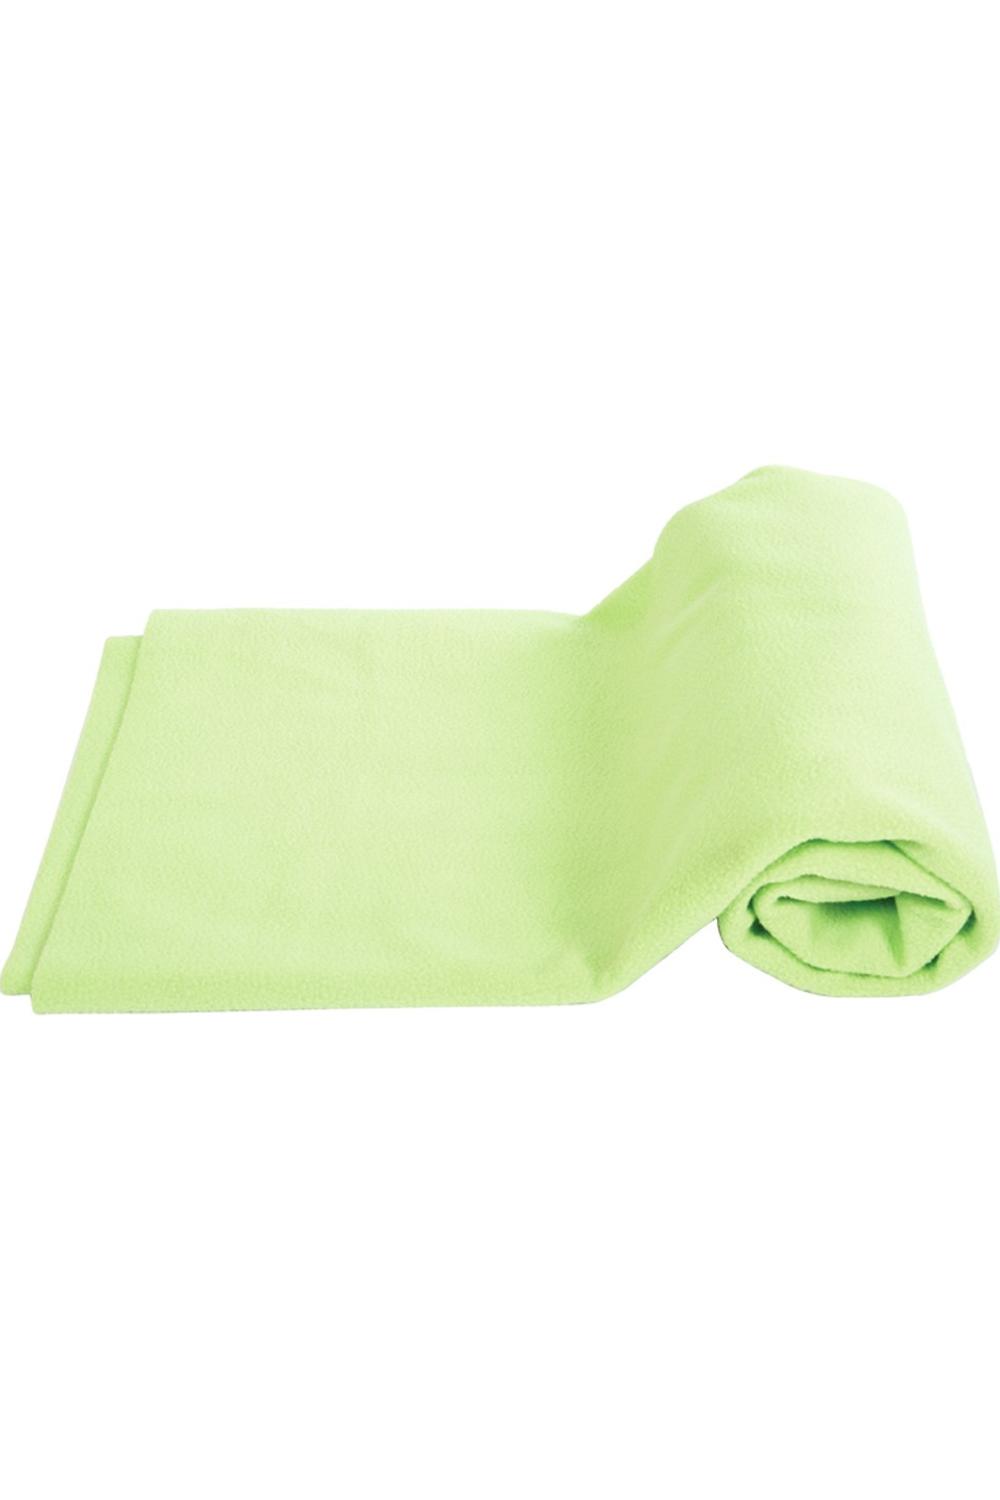 Pista Green Breathable and Total Dry Sheet Protector Mat